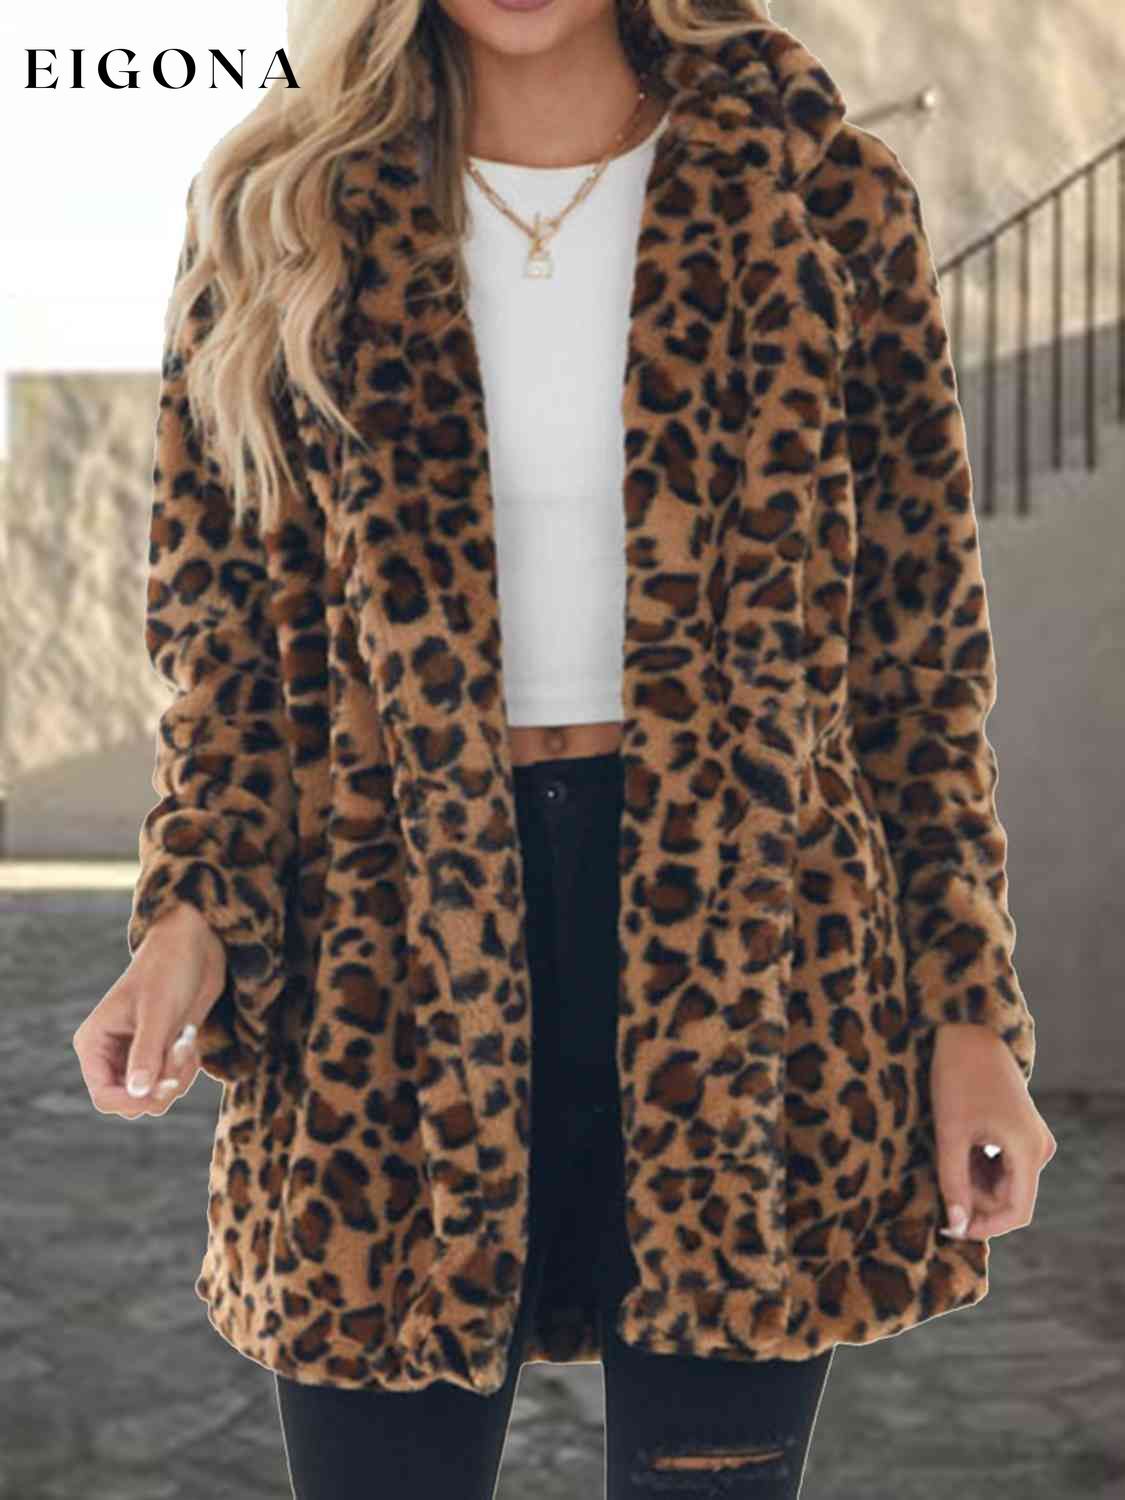 Leopard Collared Neck Coat with Pockets Coffee Brown clothes Jackets & Coats P@S Ship From Overseas